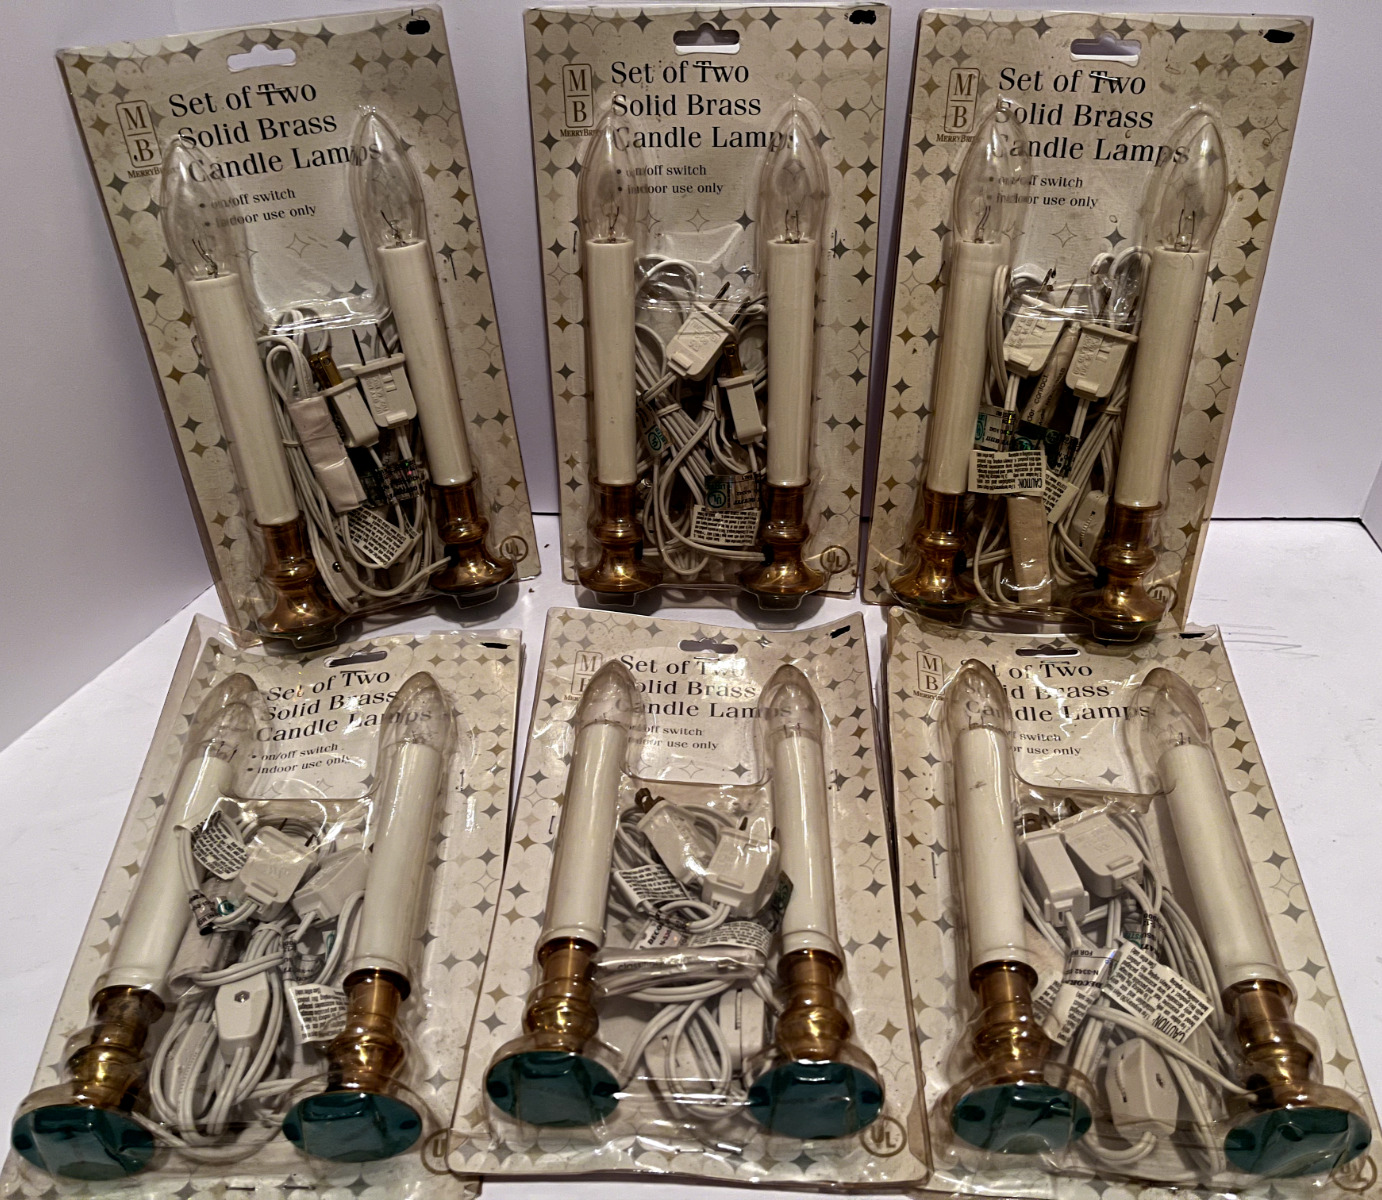 VTG Merry Brite Solid Brass Electric Candle Window Lamps 6 Packs (12 Lights)